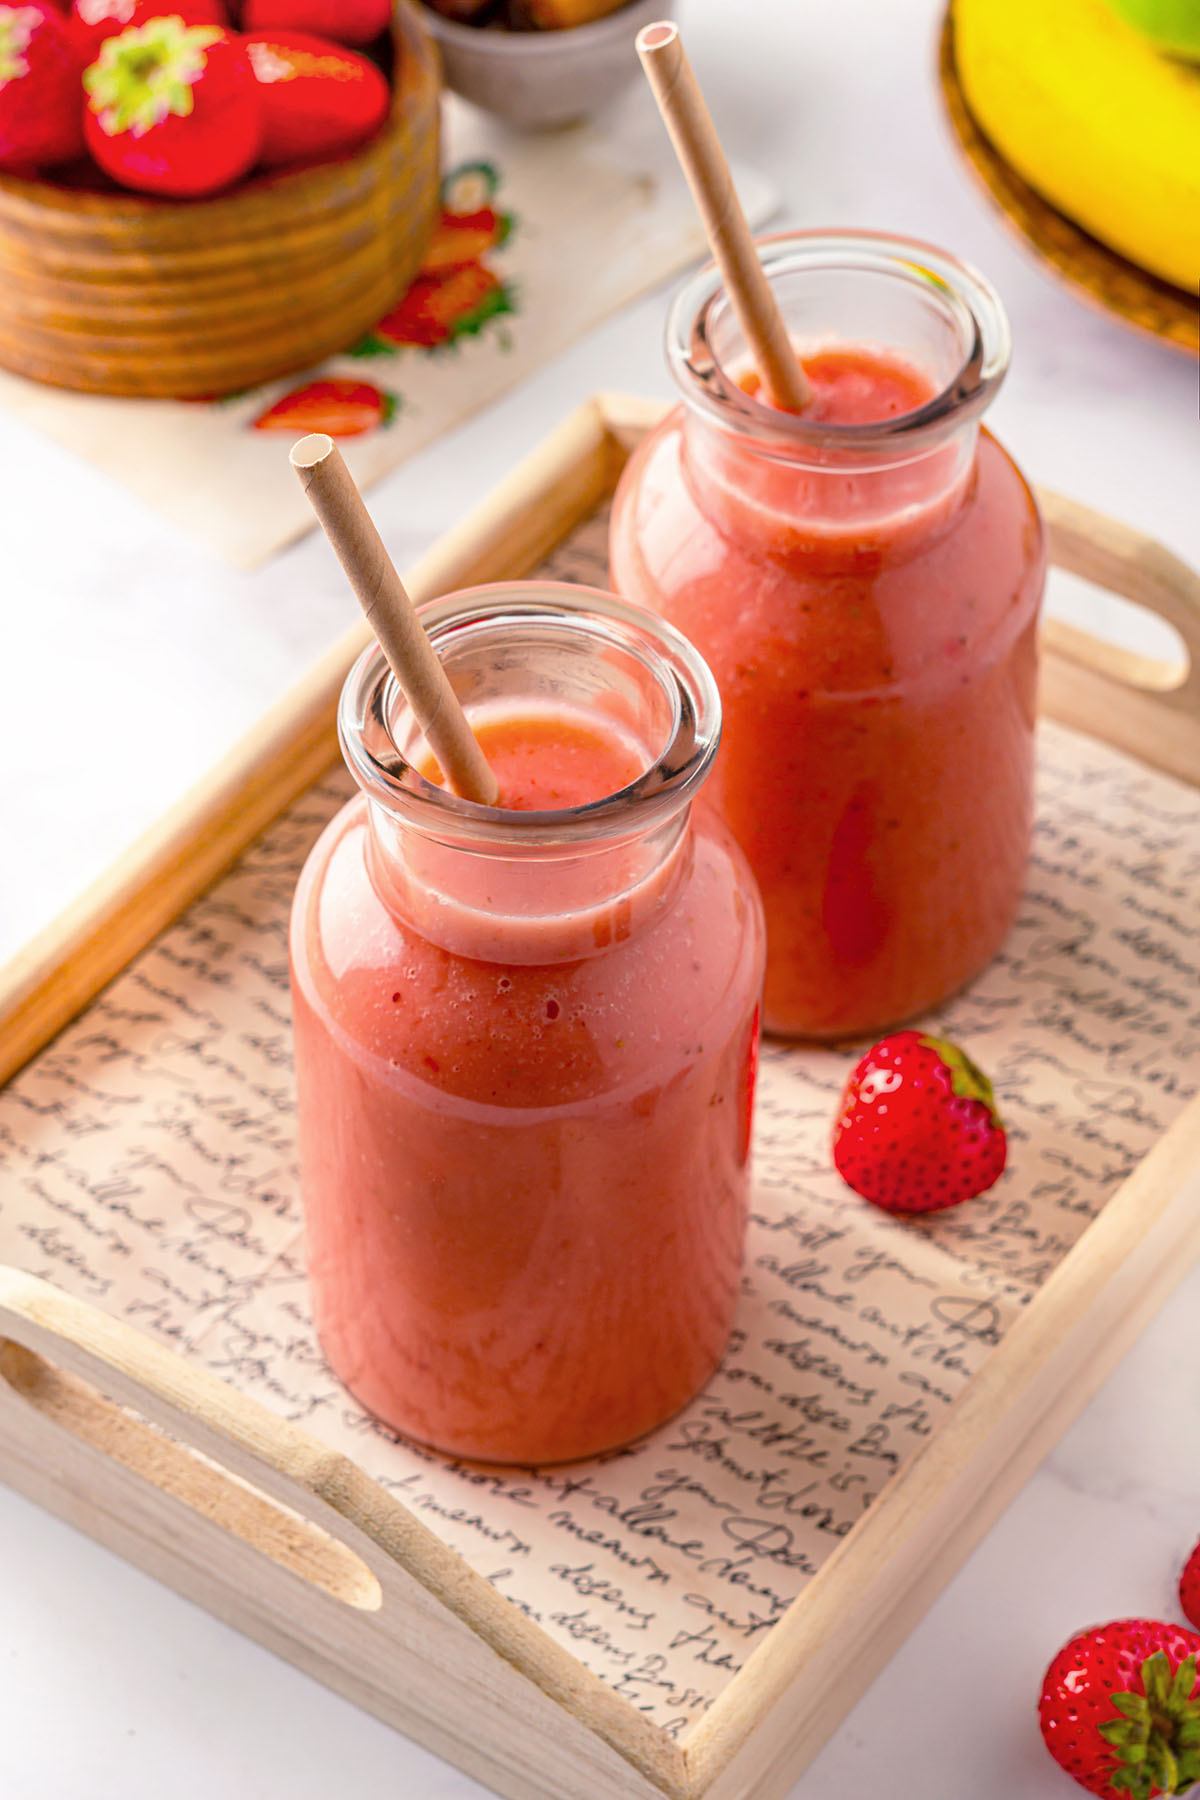 Two bottles with strawberry apple smoothie